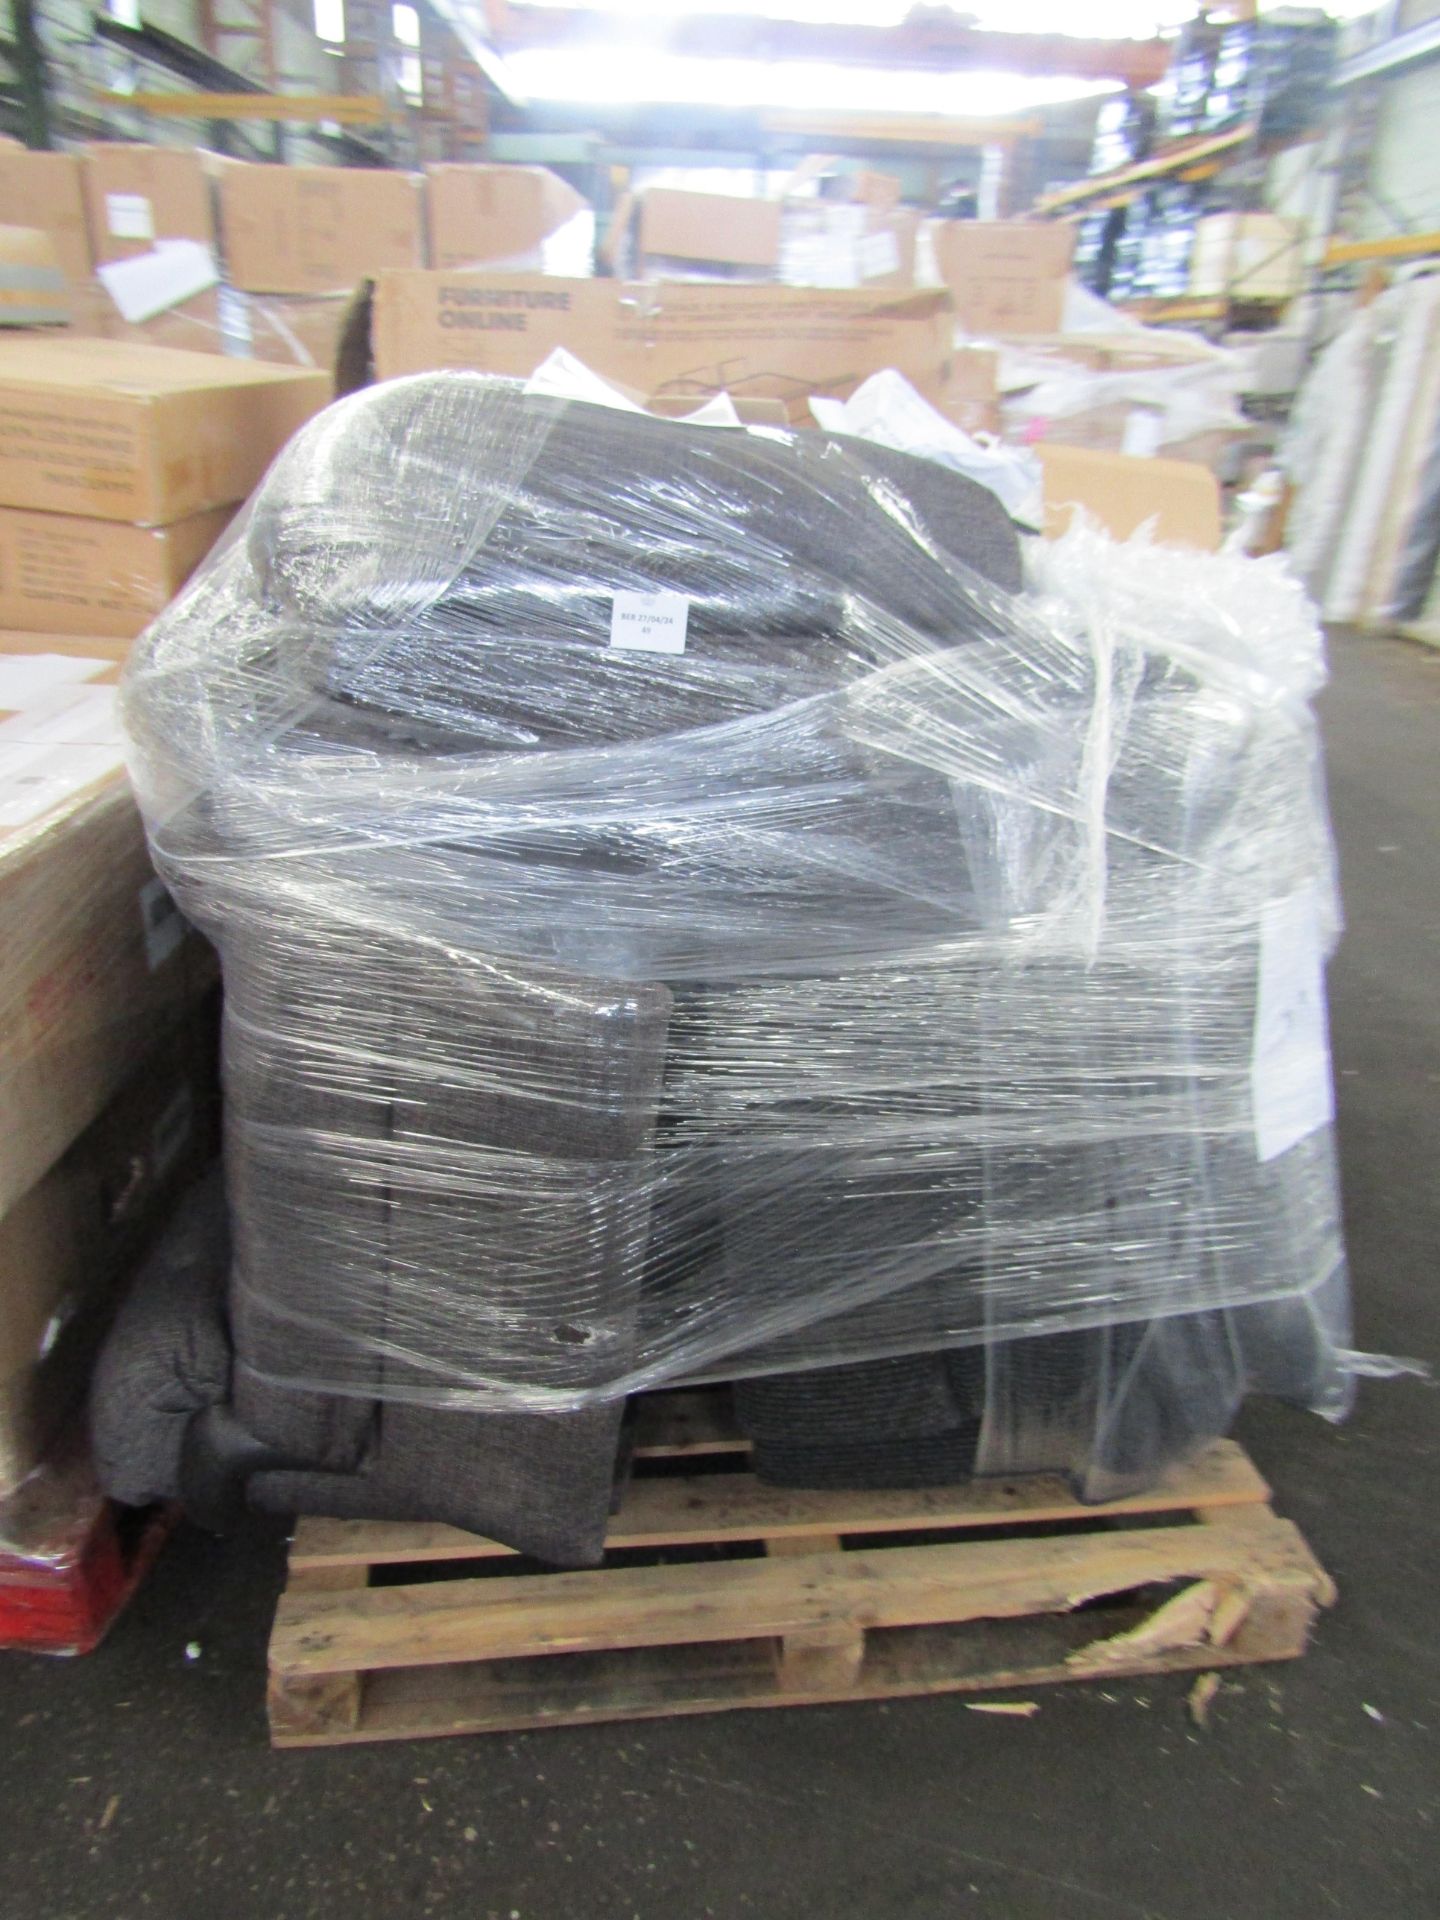 2 x SCS Ex-Retail Customer Returns Mixed Lot - Total RRP est. 3098.99About the Product(s) This lot